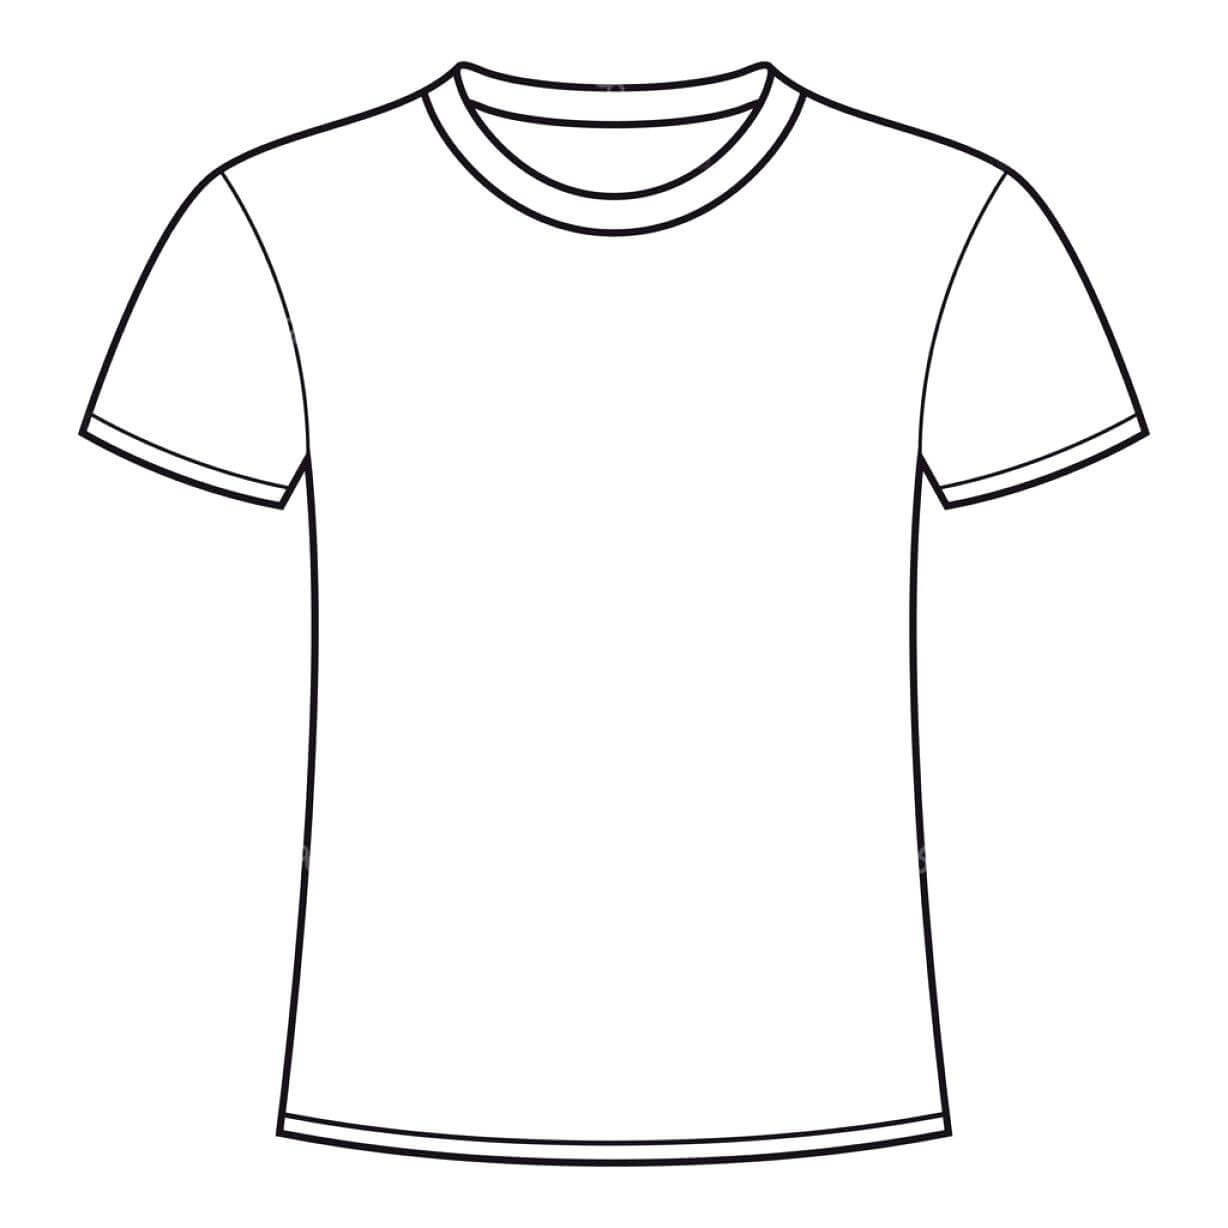 Printable Blank T Shirt Outline ✓ T Shirt Collections Throughout Printable Blank Tshirt Template